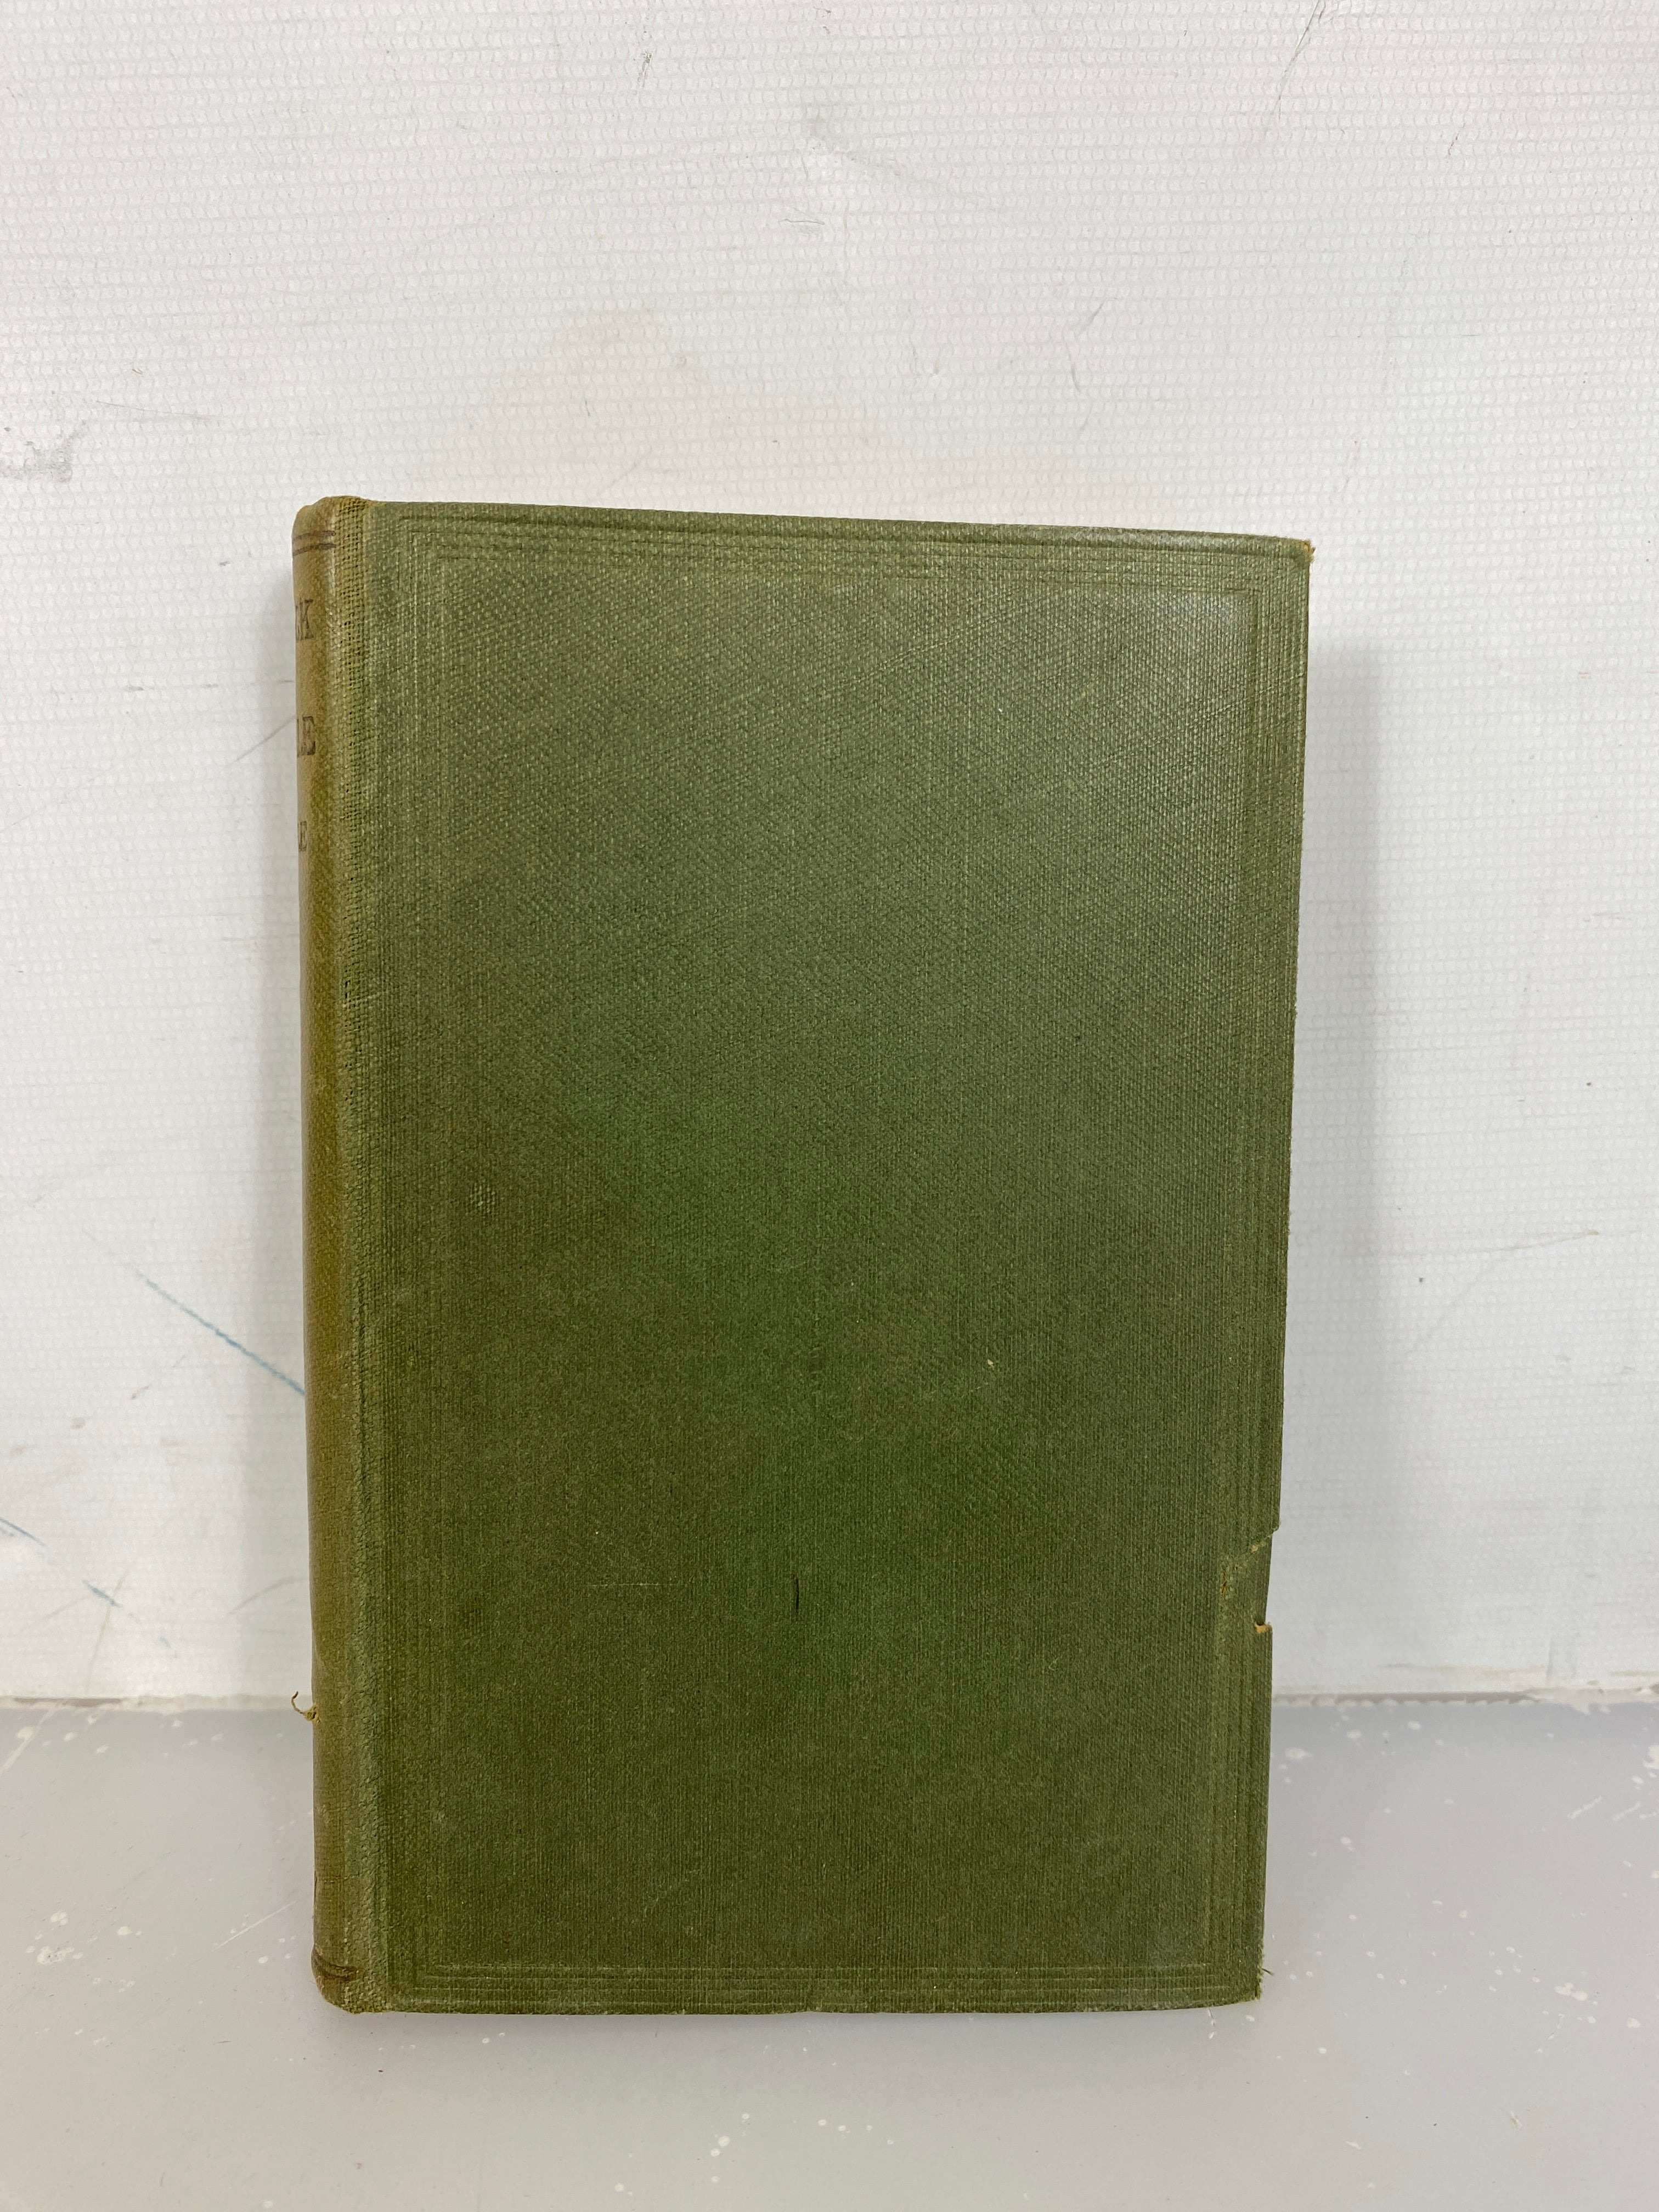 Antique Classic Moby Dick or The Whale by Herman Melville c1920s Humphrey Milford Oxford University Press HC